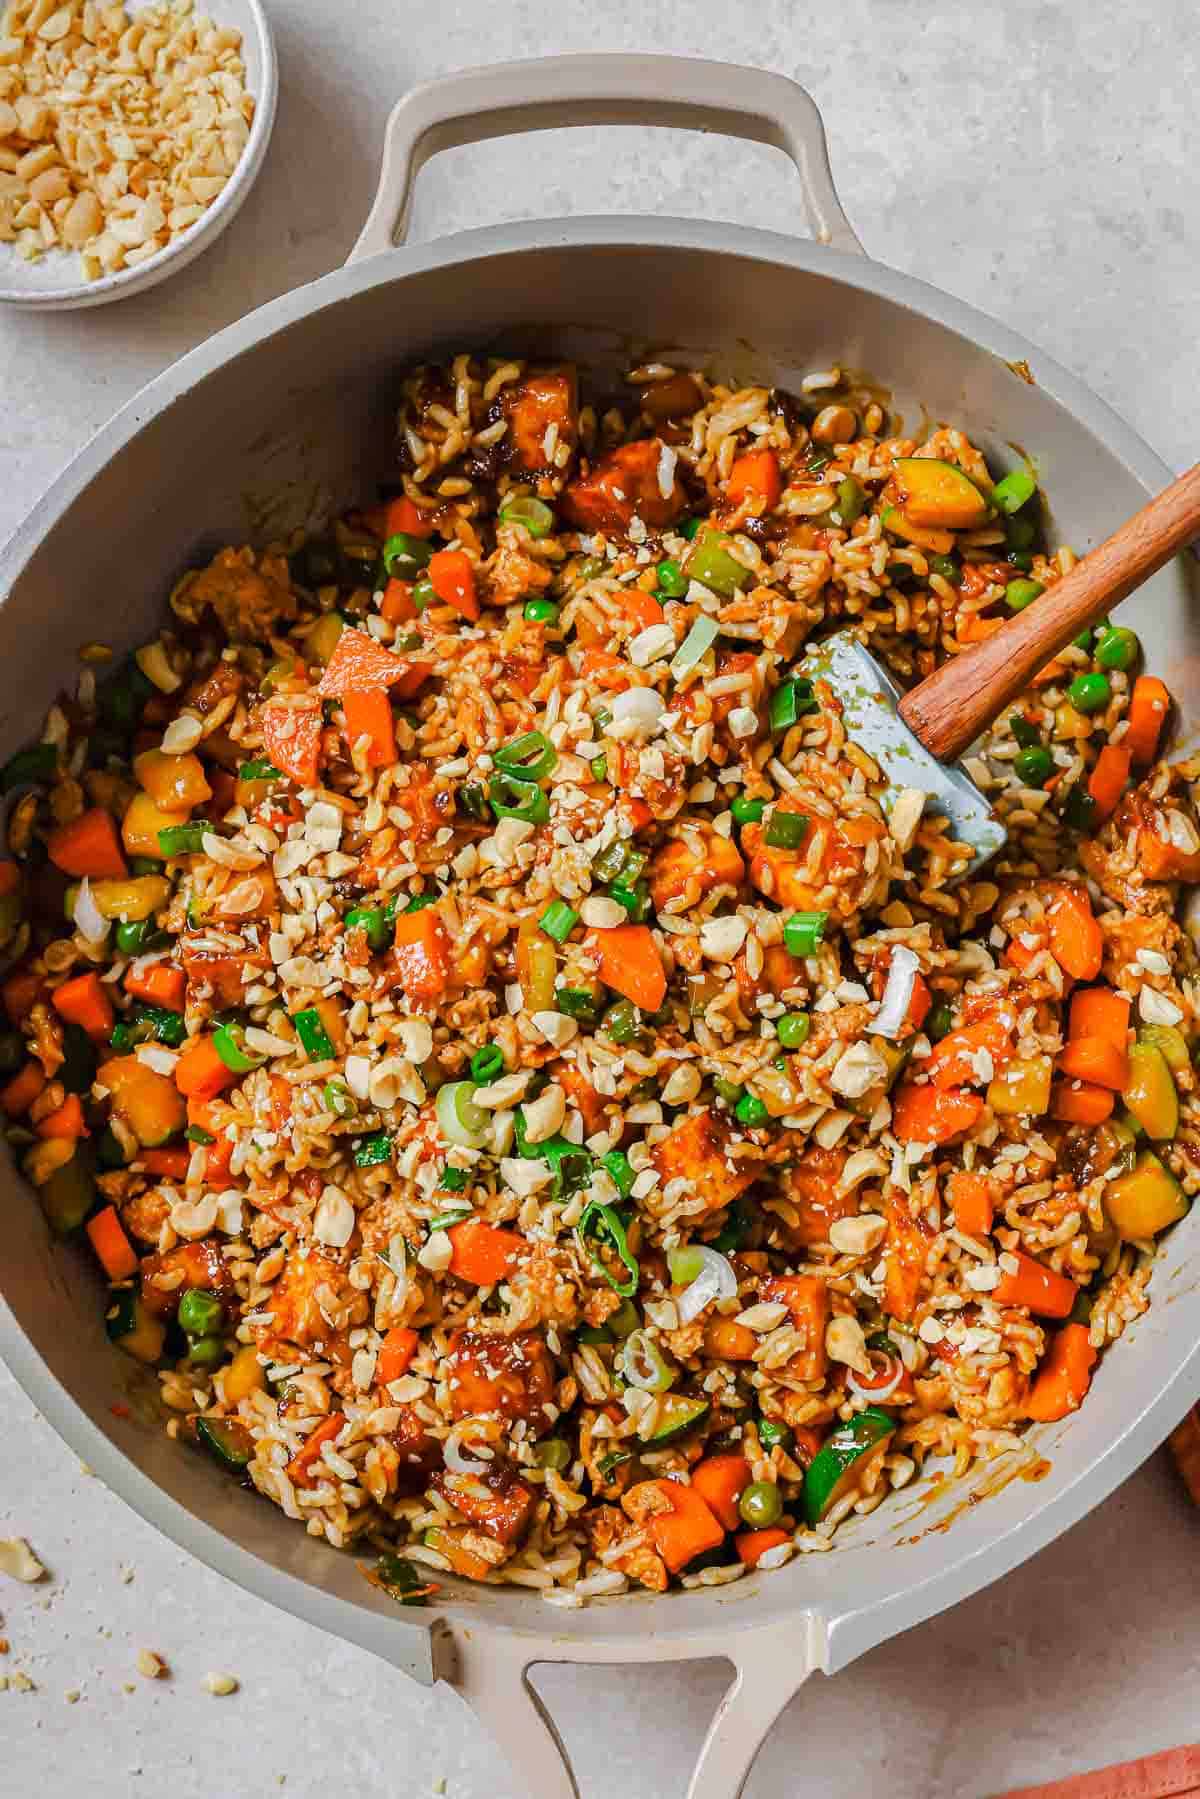 A pan full of fried rice with tofu and vegetables and a wooden spoon.